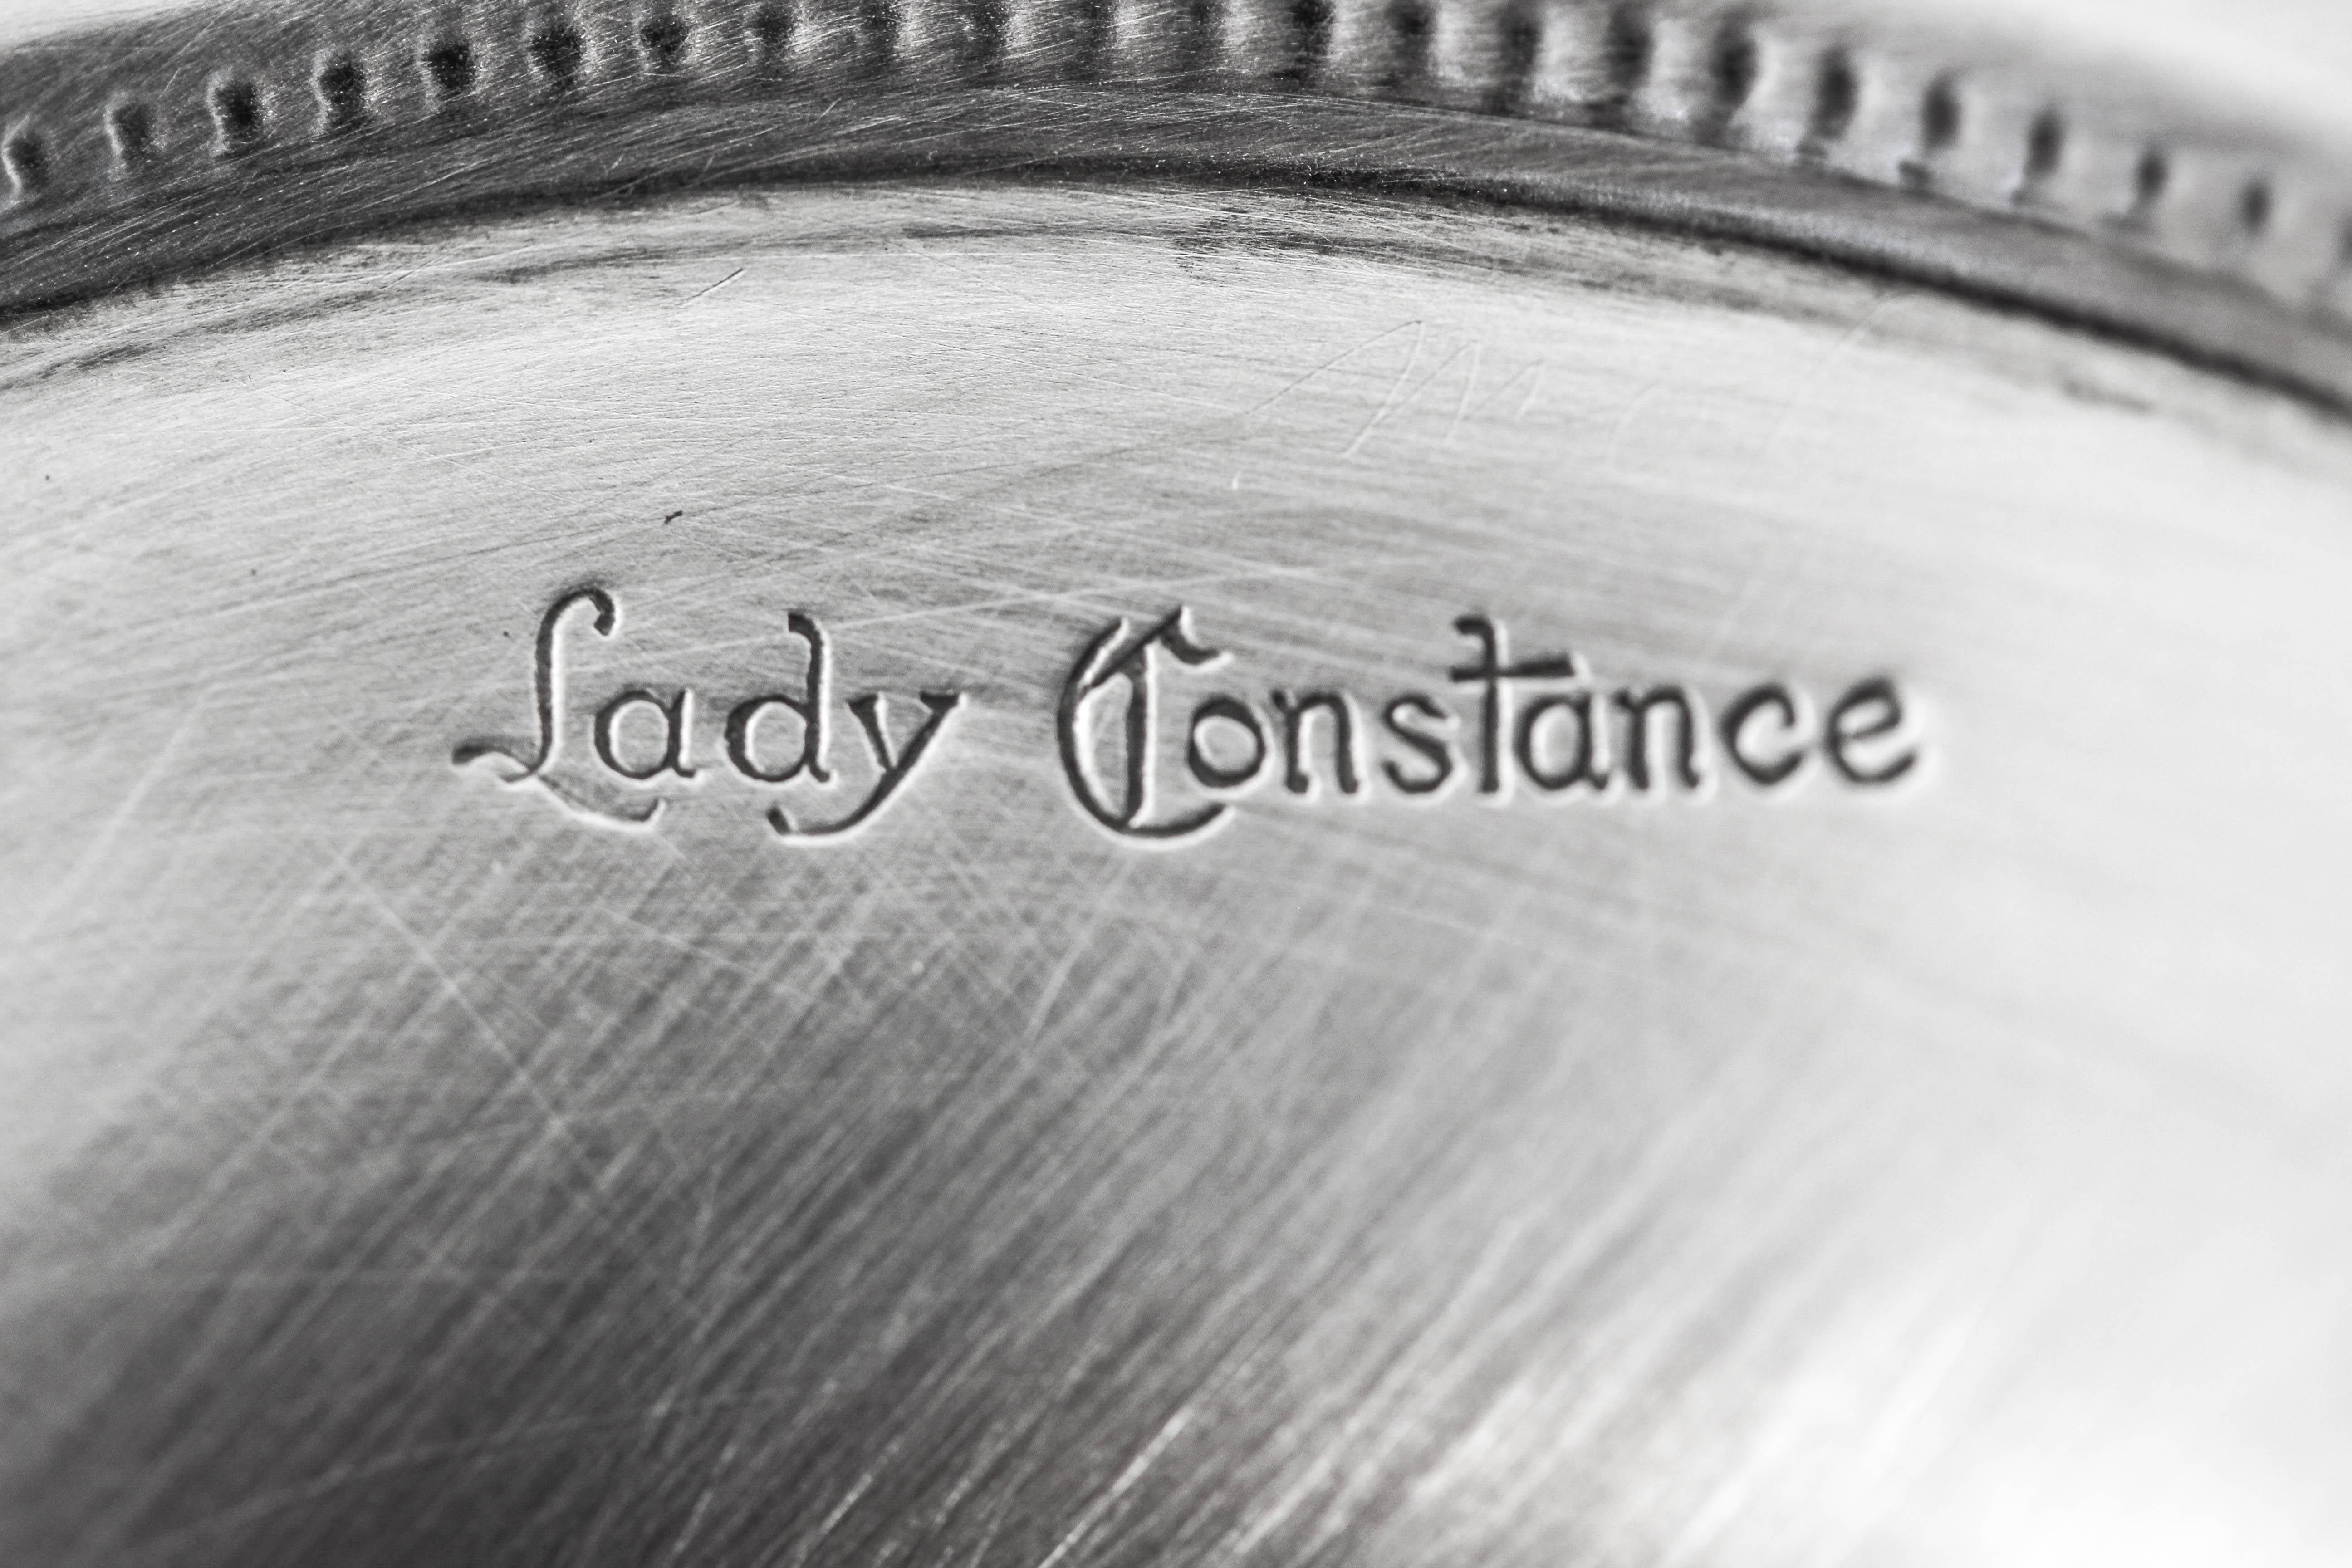 Sterling Lady Constance Tazza 1